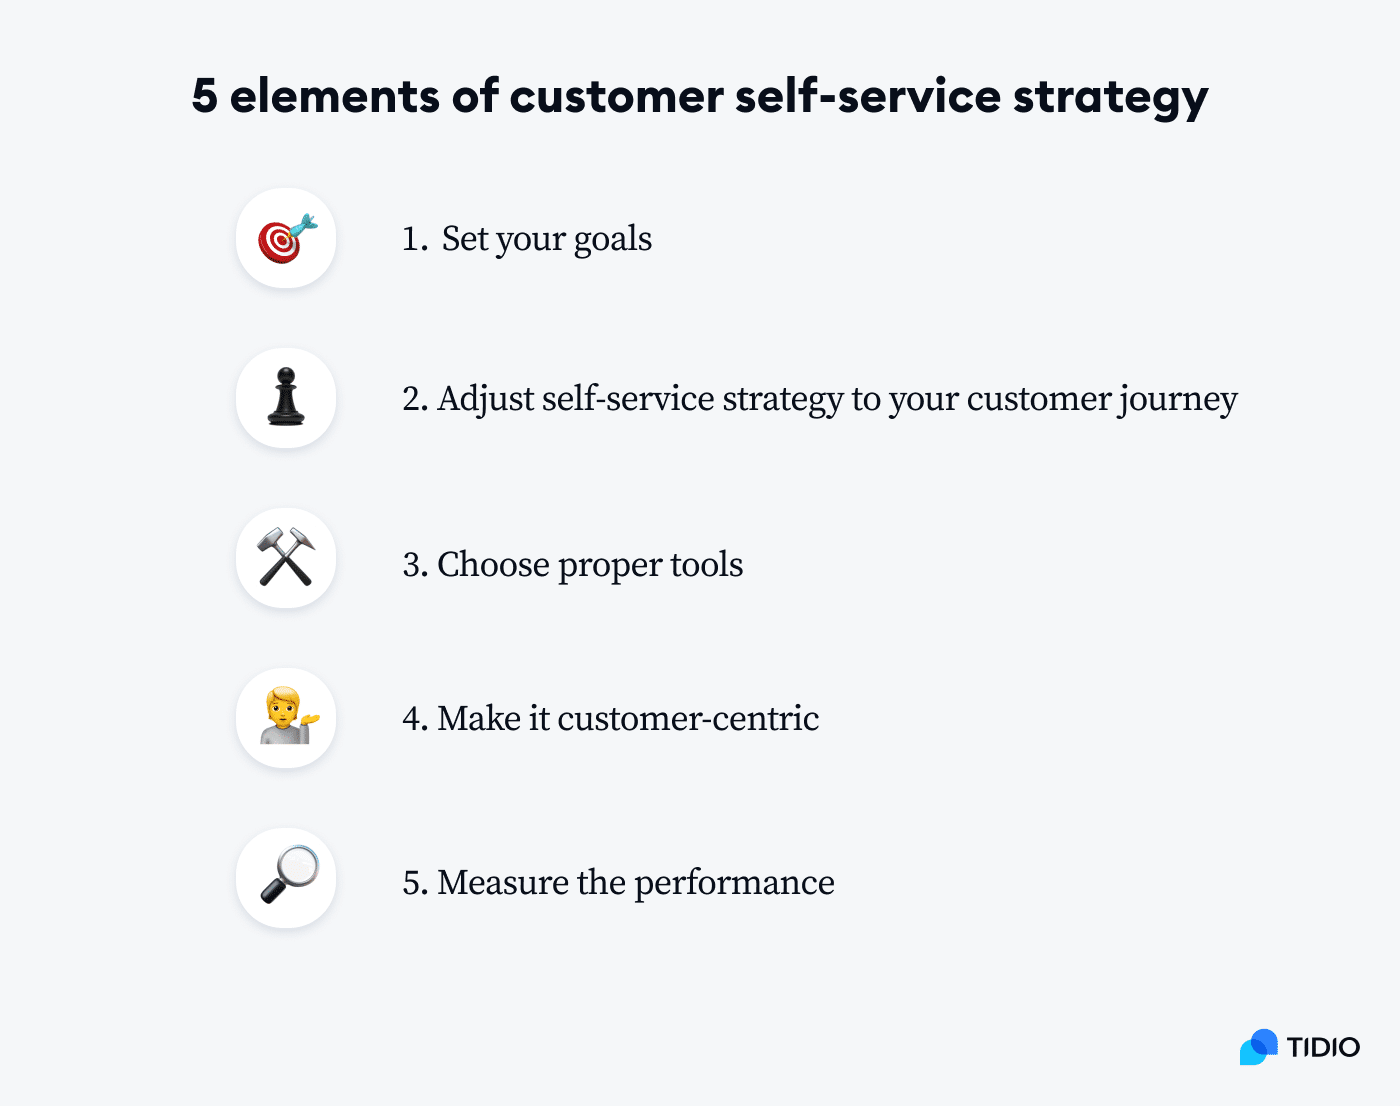 5 elements for a successful customer self-service strategy on image